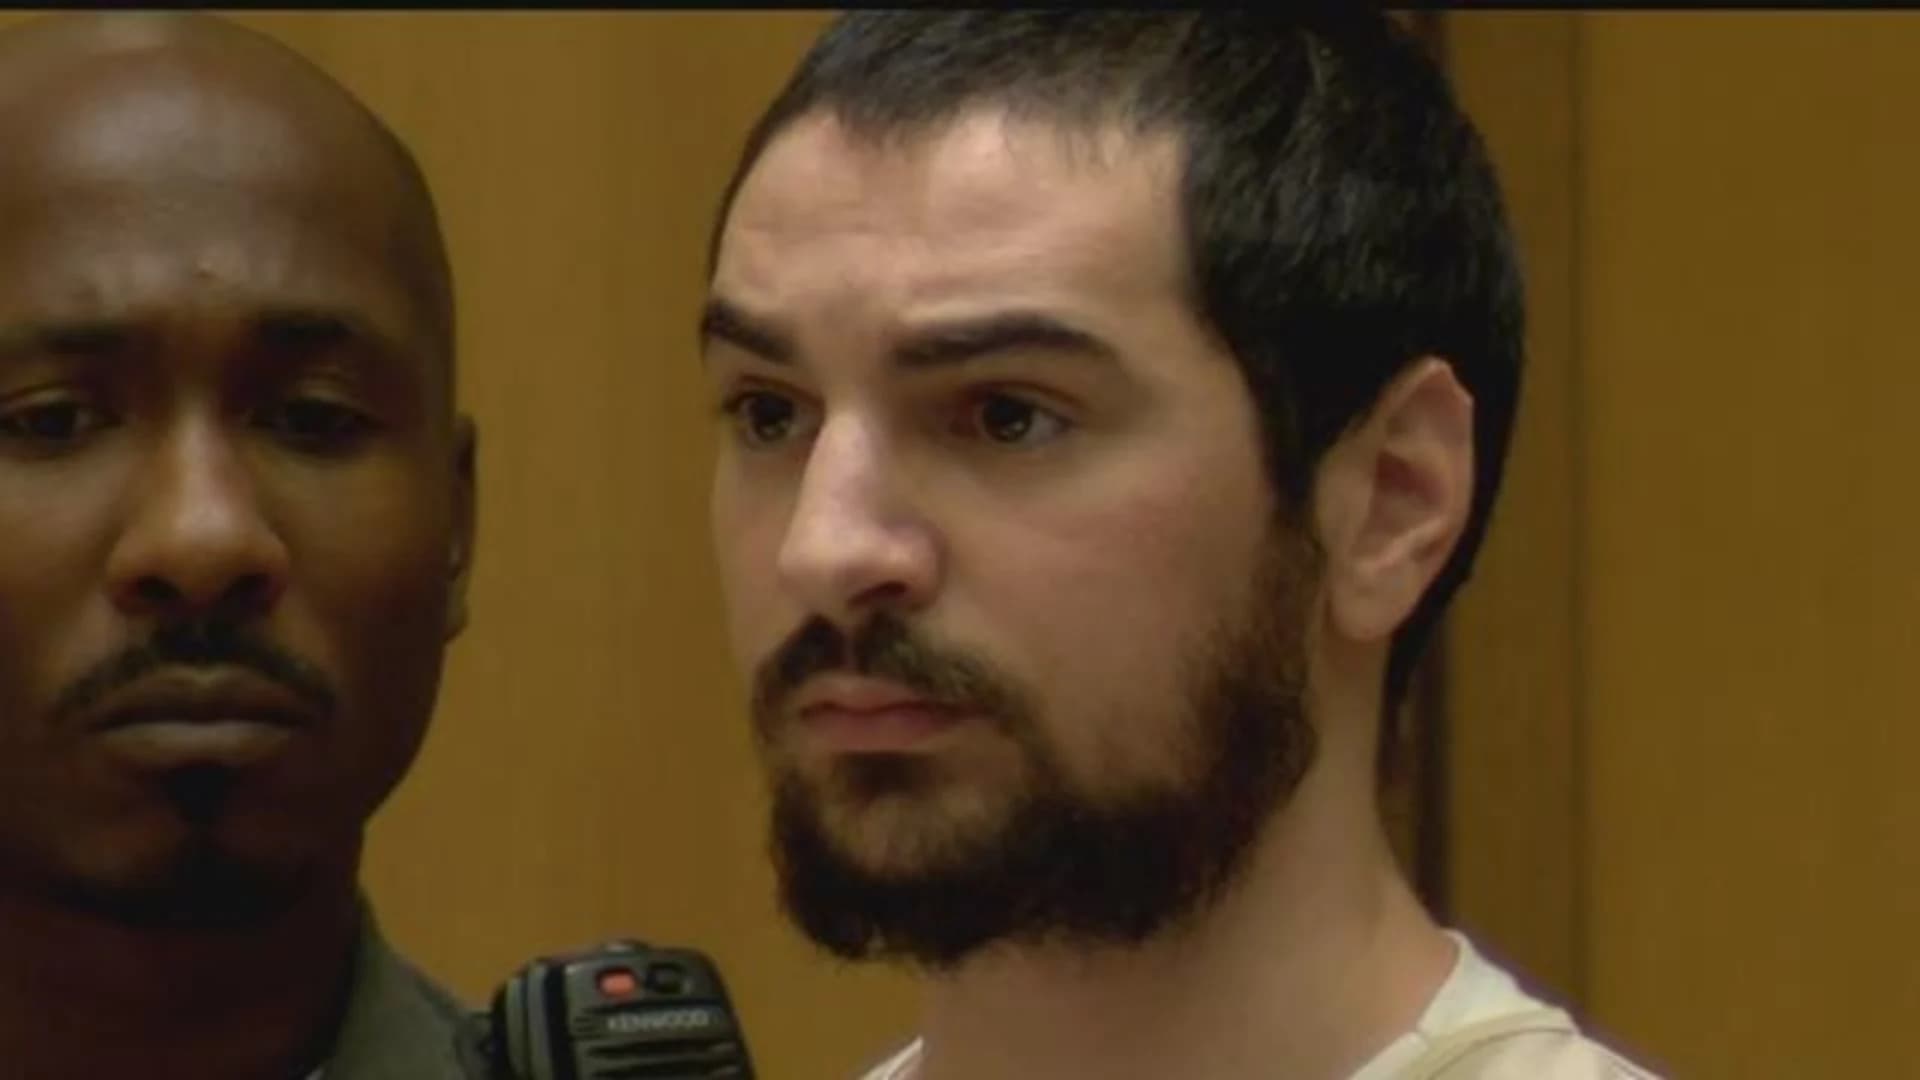 Brandon Wagshol, accused of showing interest in mass shooting, released on bond